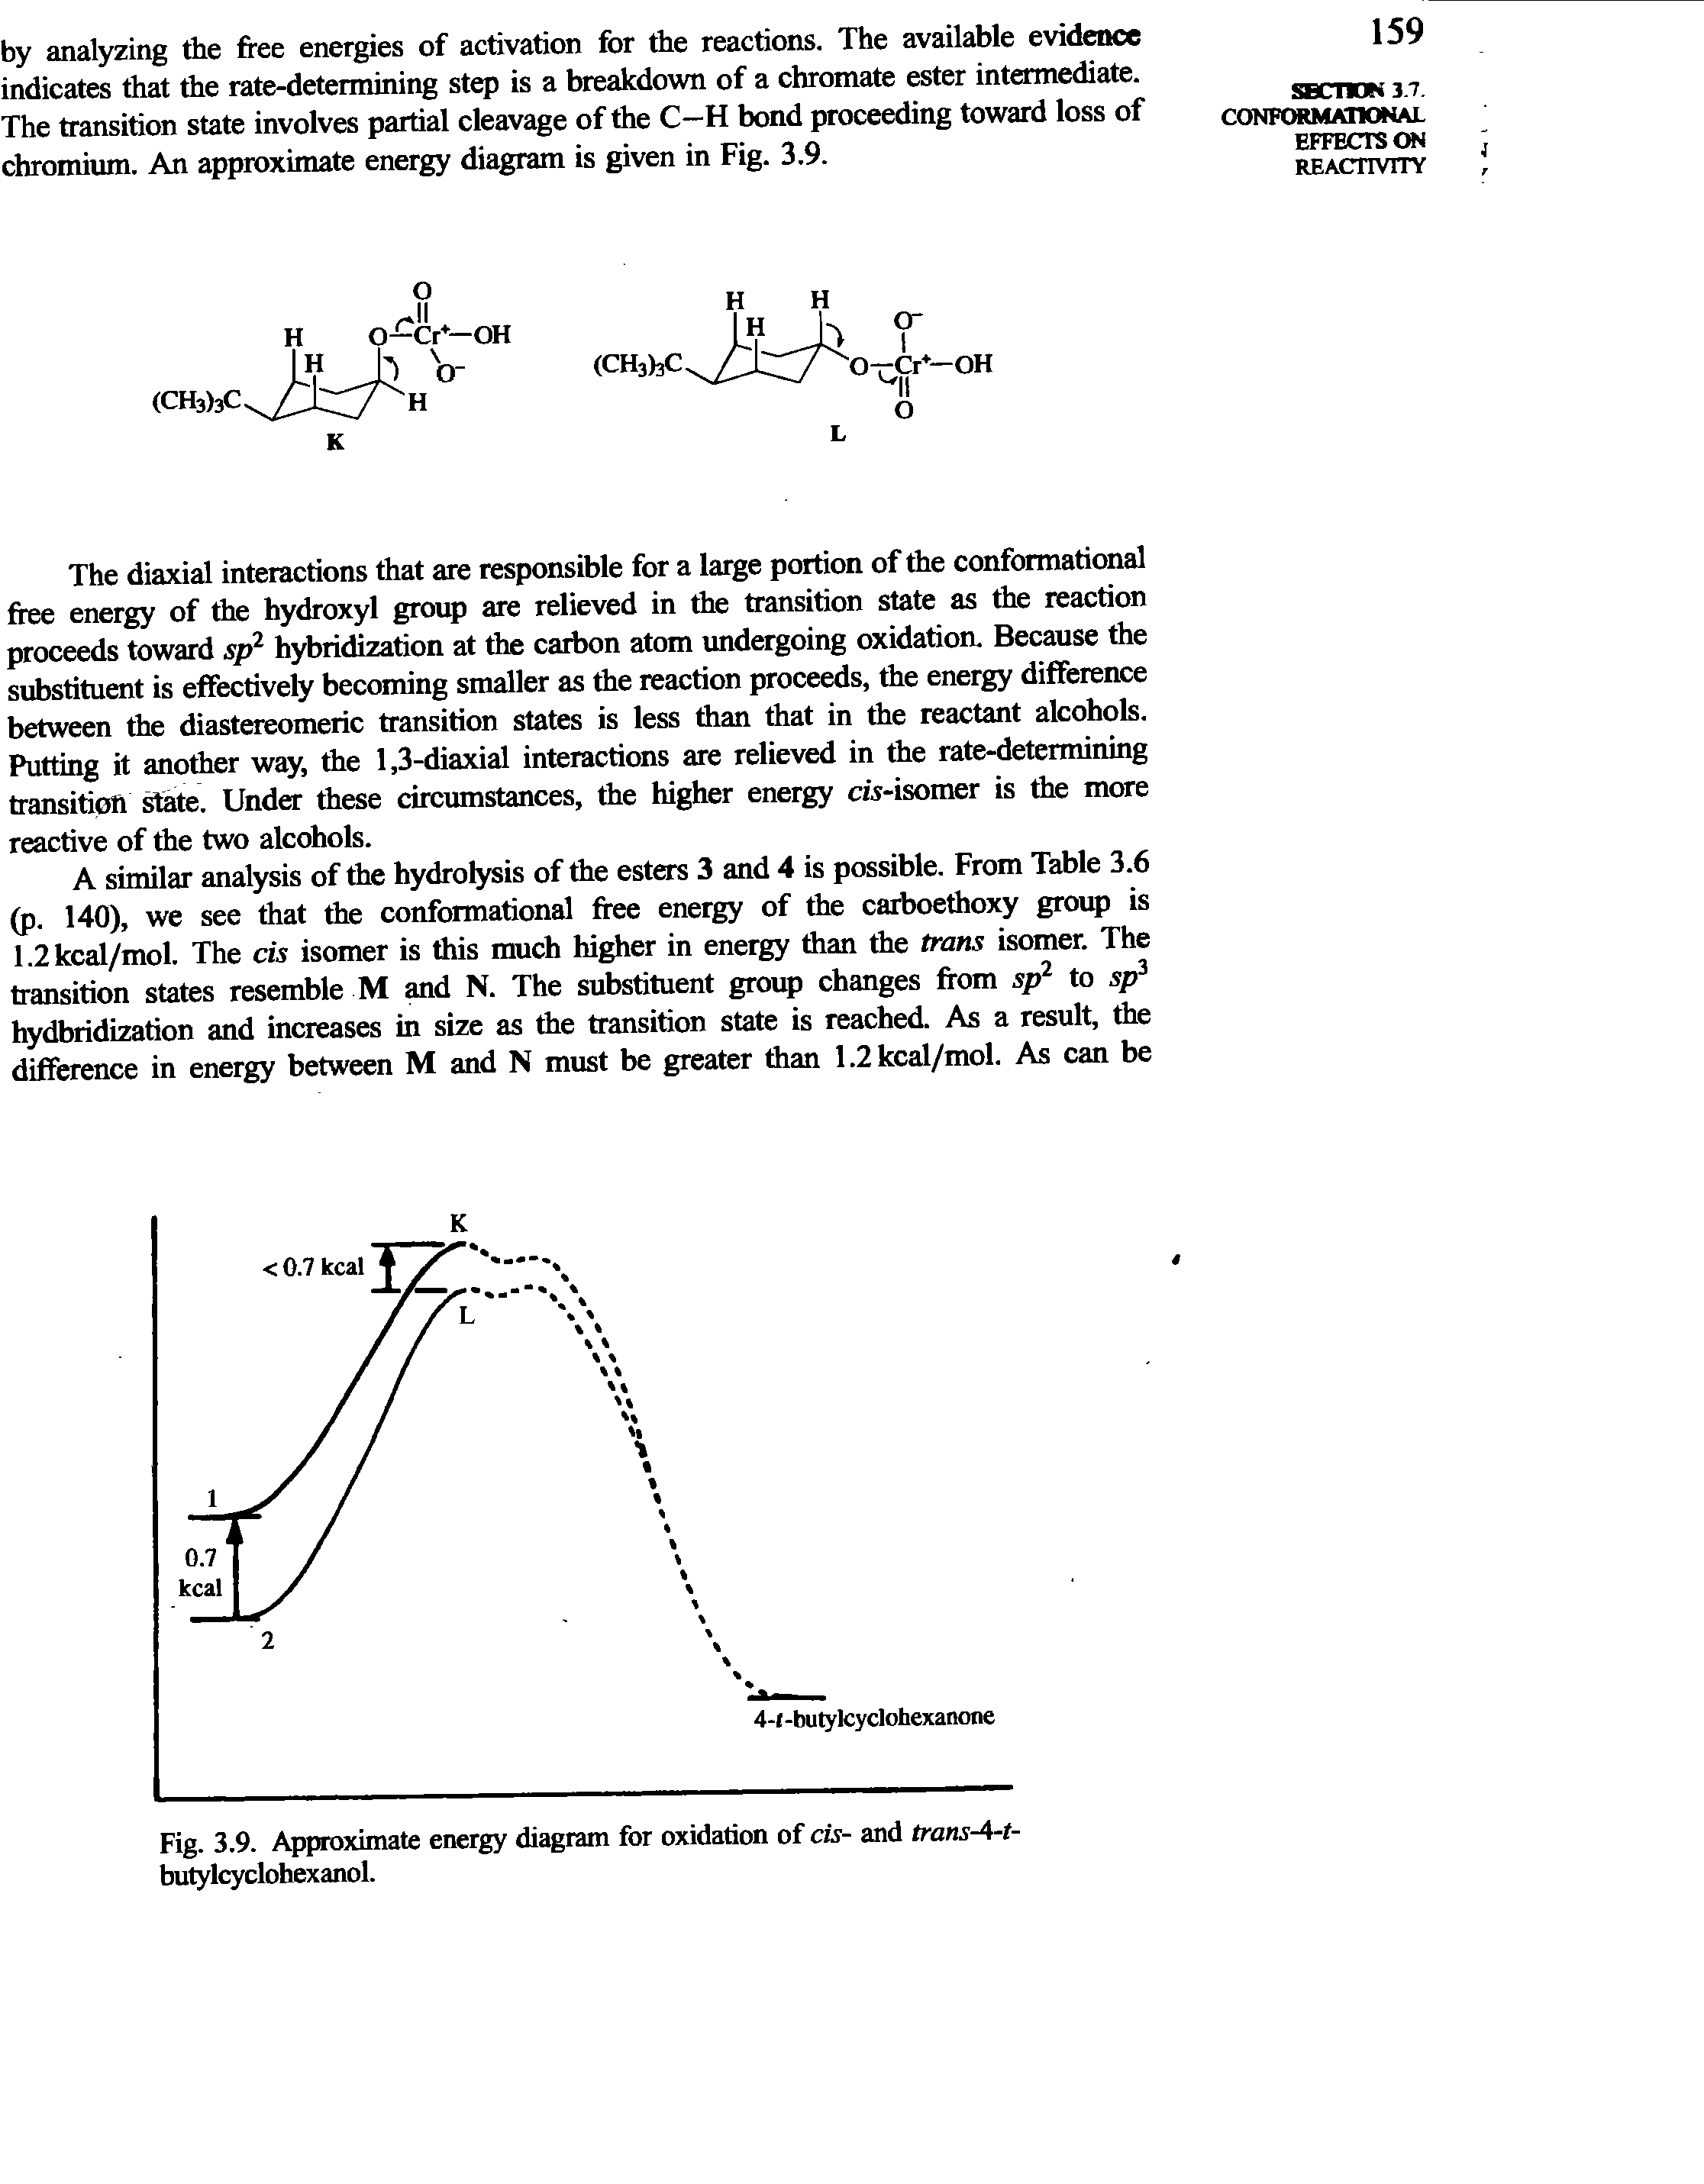 Fig. 3.9. Approximate energy diagram for oxidation of cis- and trans-A-t-butylcyclohexanol.